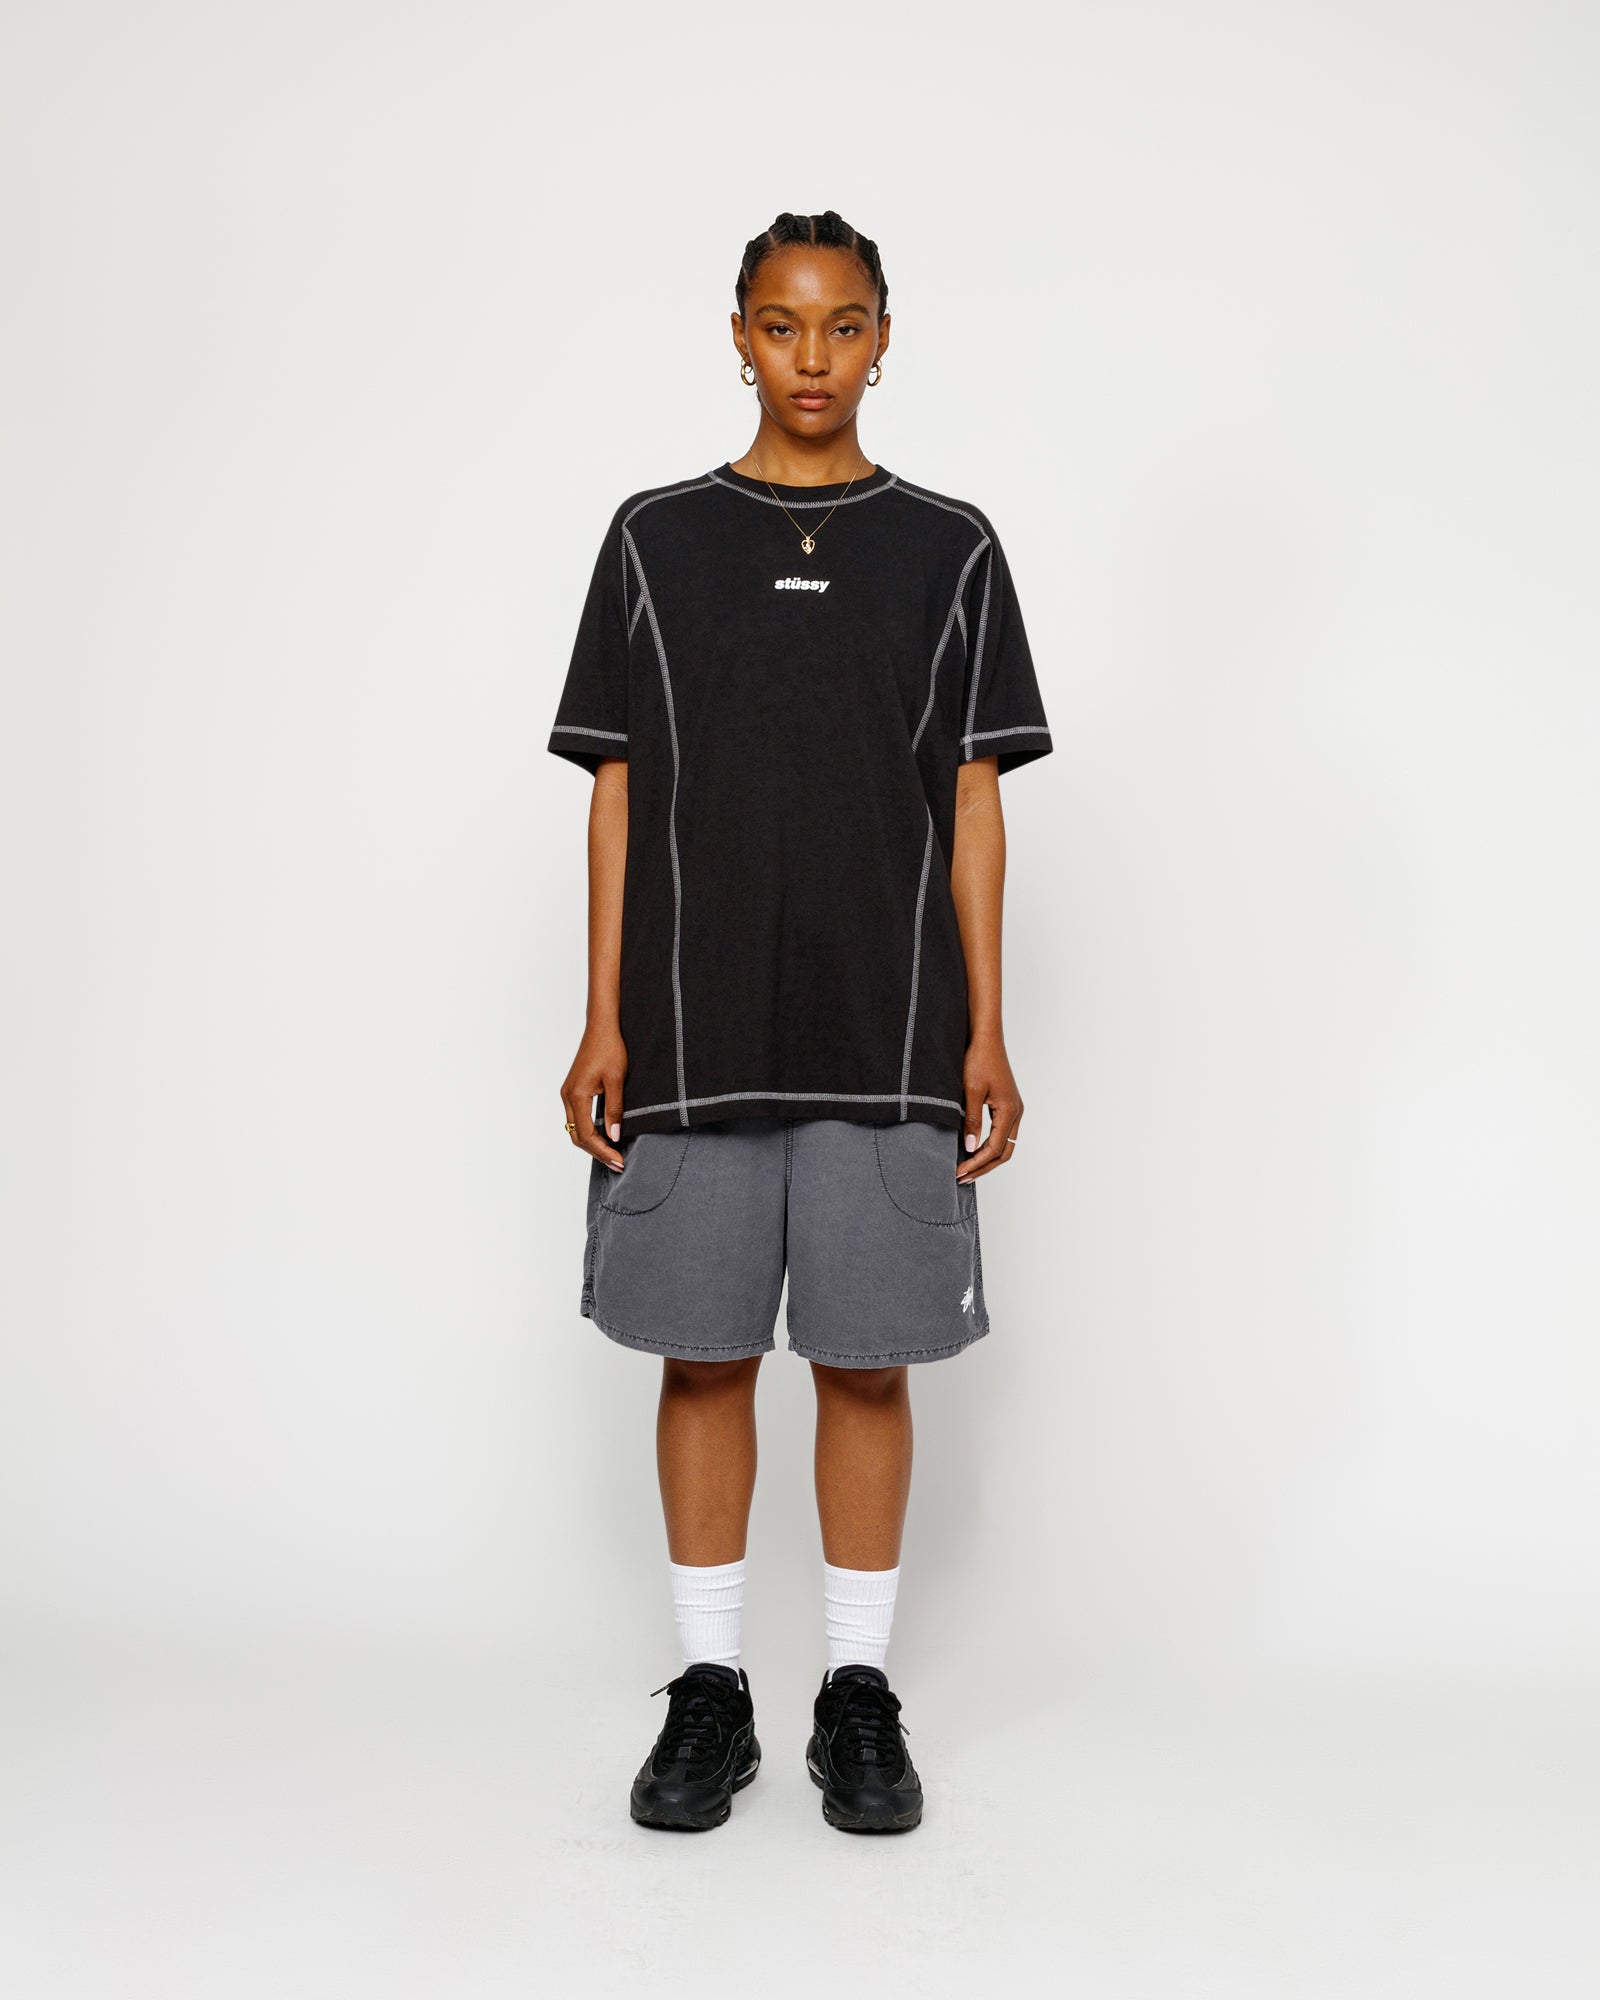 Stüssy Water Short Pigment Stock Charcoal Shorts